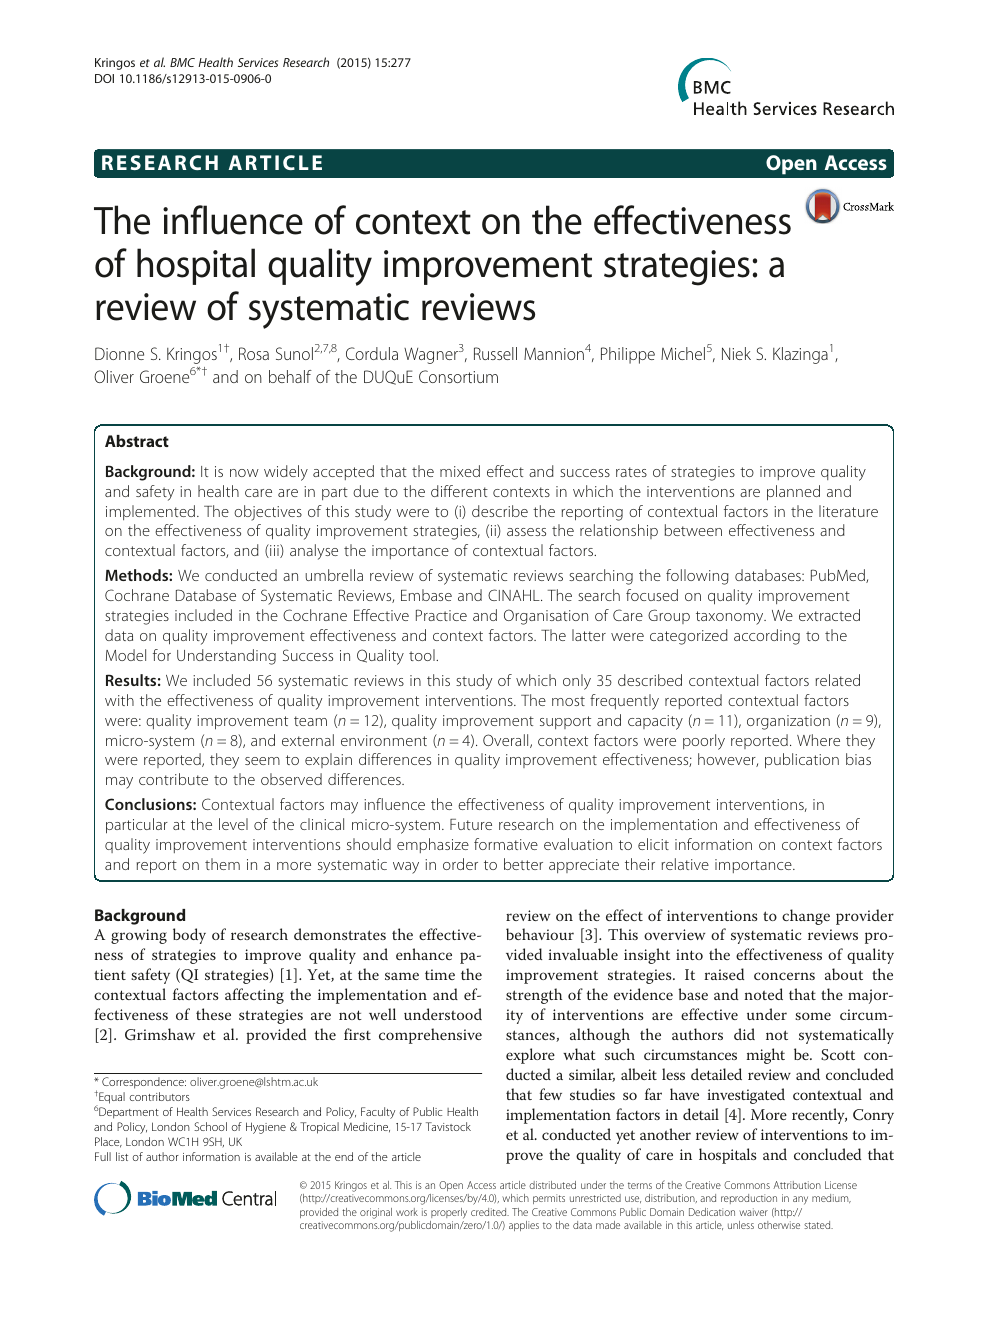 The Influence Of Context On The Effectiveness Of Hospital Quality Improvement Strategies A Review Of Systematic Reviews Topic Of Research Paper In Clinical Medicine Download Scholarly Article Pdf And Read For